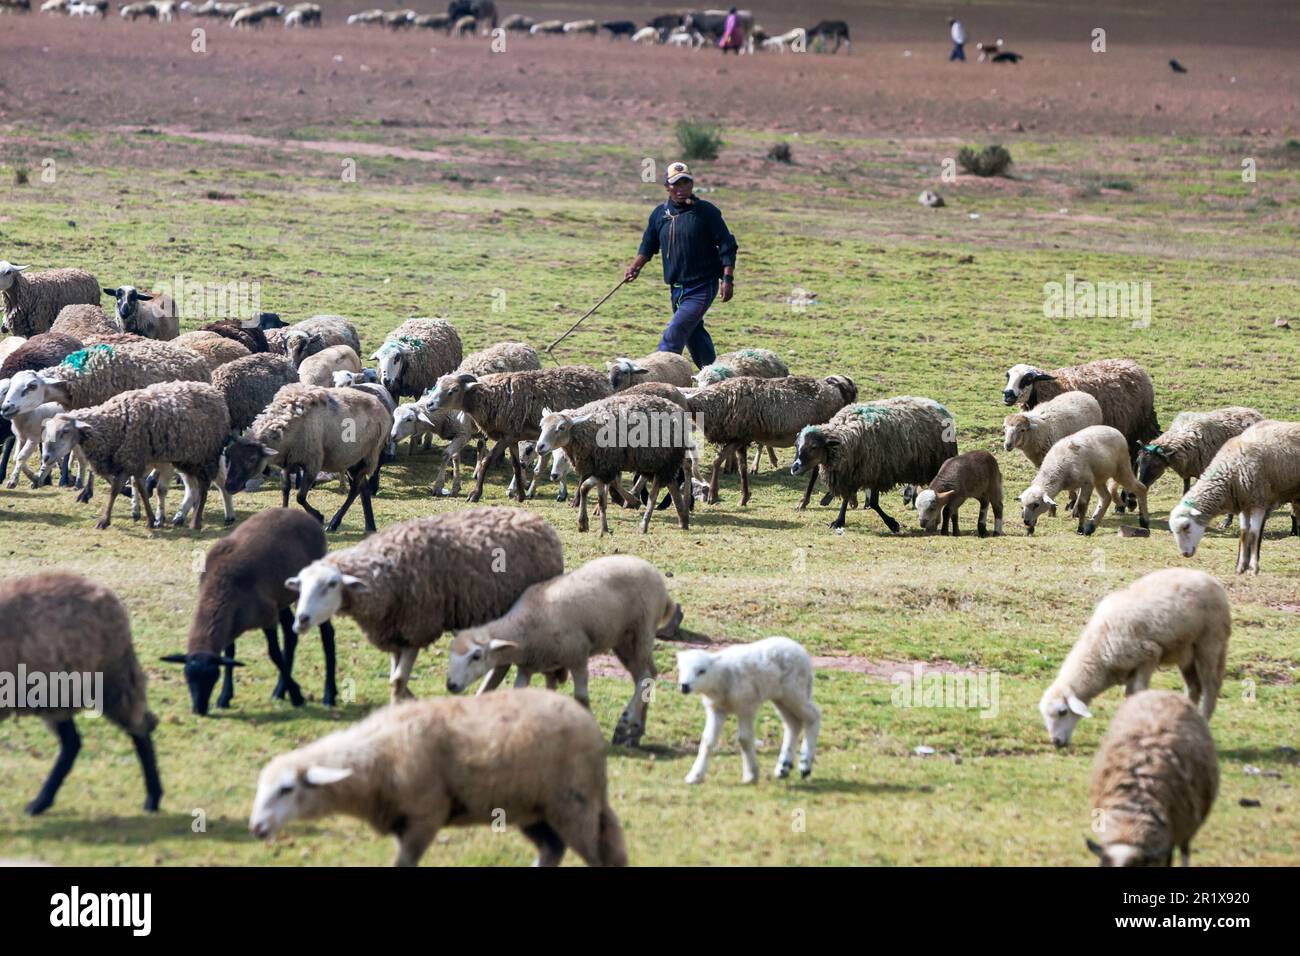 MARAS, PERU - APRIL 30, 2012 : A man walking with his flock of sheep as the animals graze on a plateau at Maras in Peru. Maras is a town in the Sacred Stock Photo